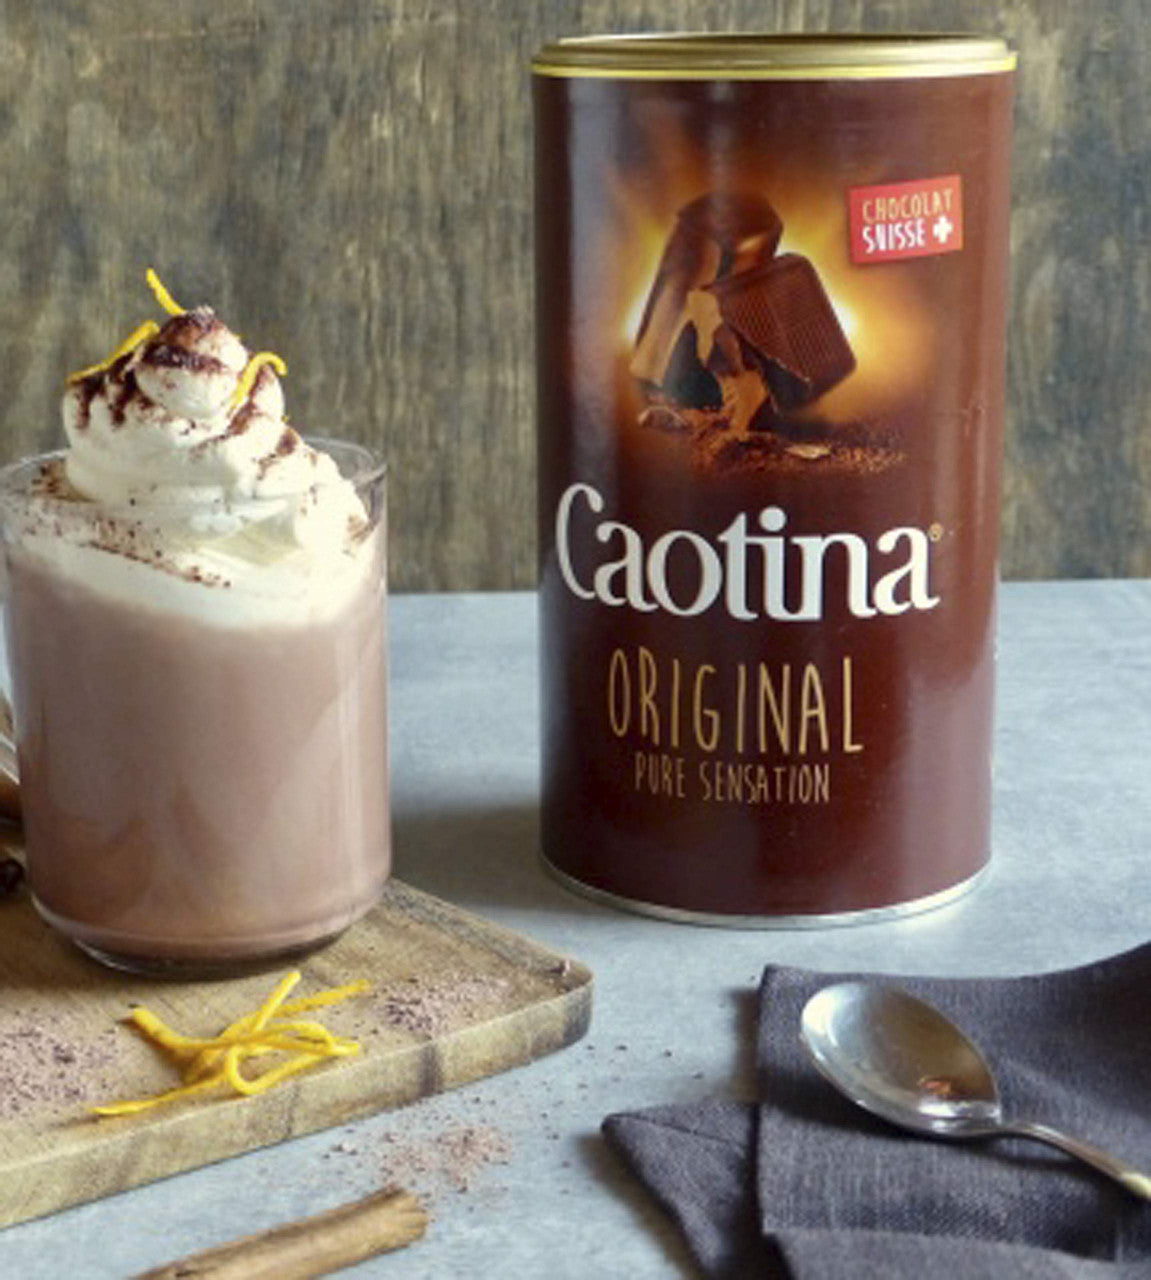 Caotina original 200g/7.1 oz., Cocoa Drink mix, {Imported from Canada}